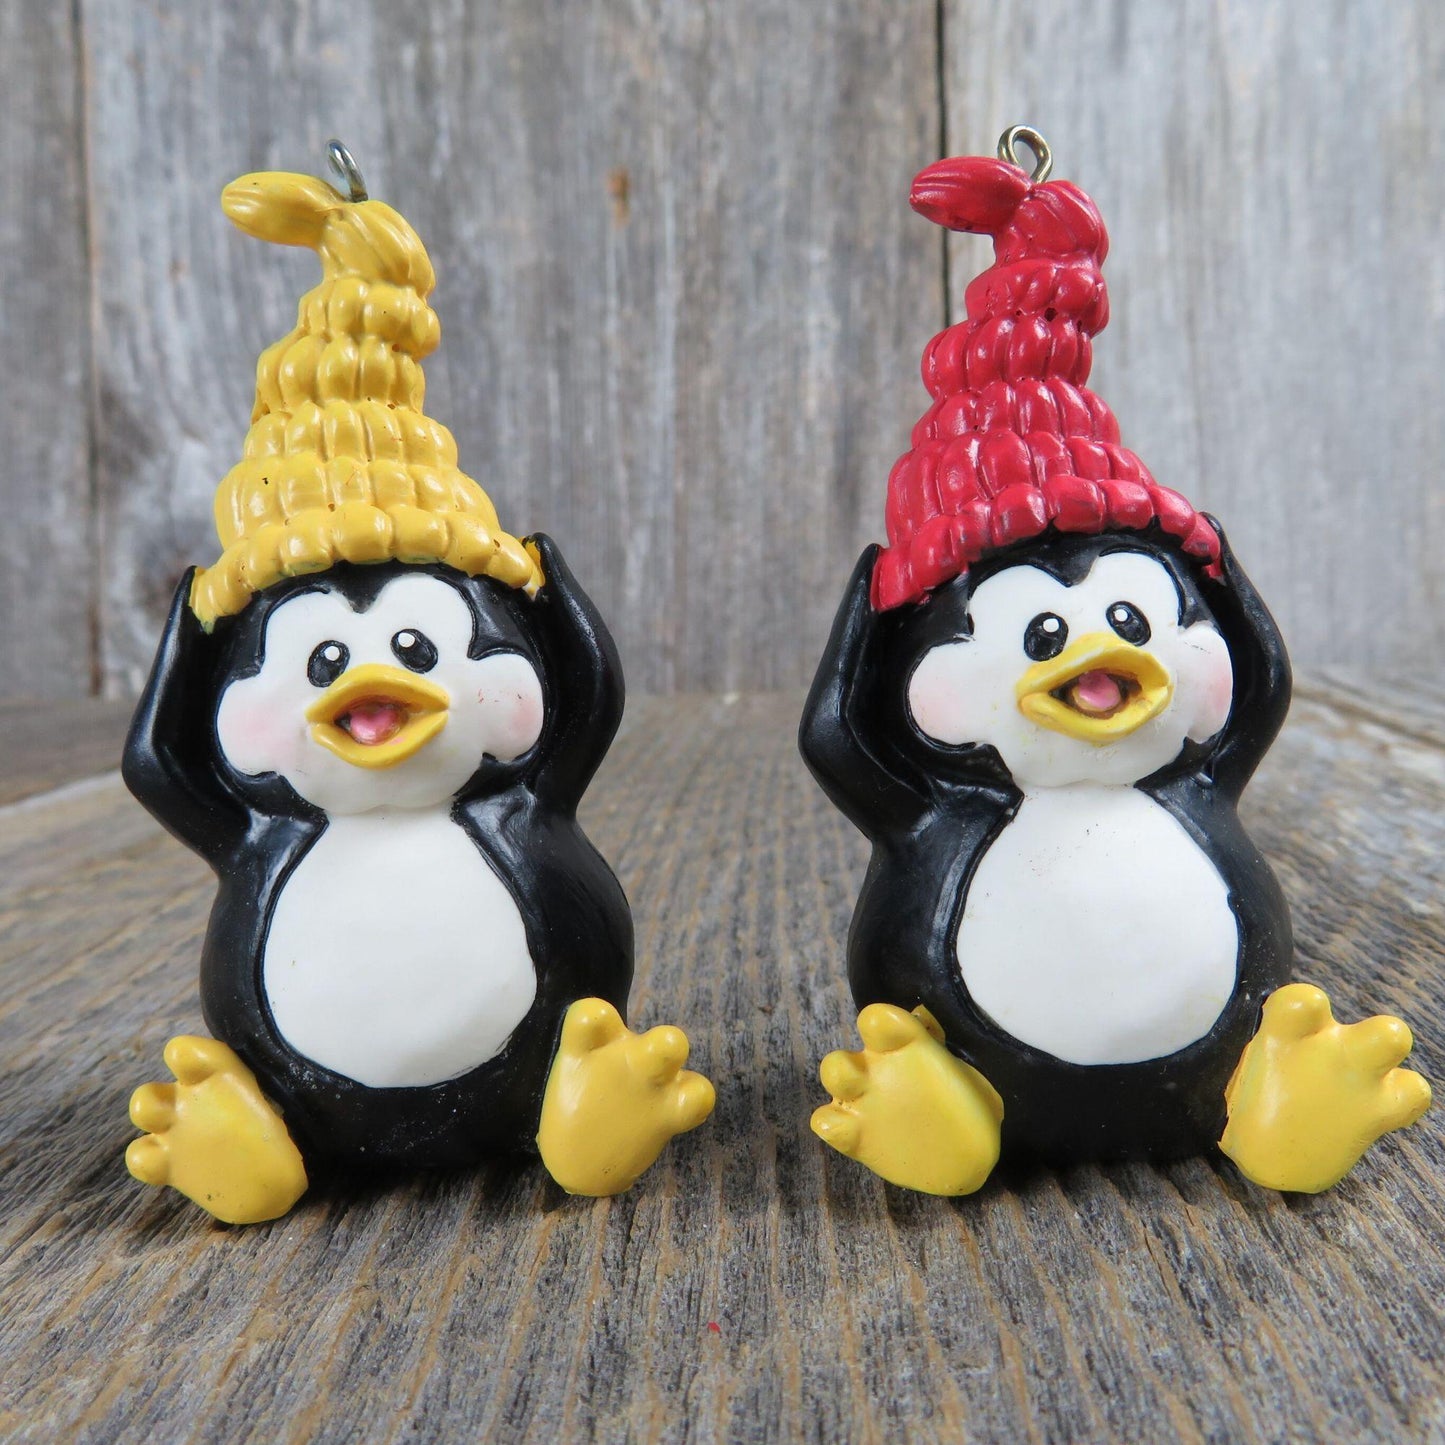 Vintage Penguin Knit Hats Ornament House of LLoyd Yellow Red Winter Cap 1997